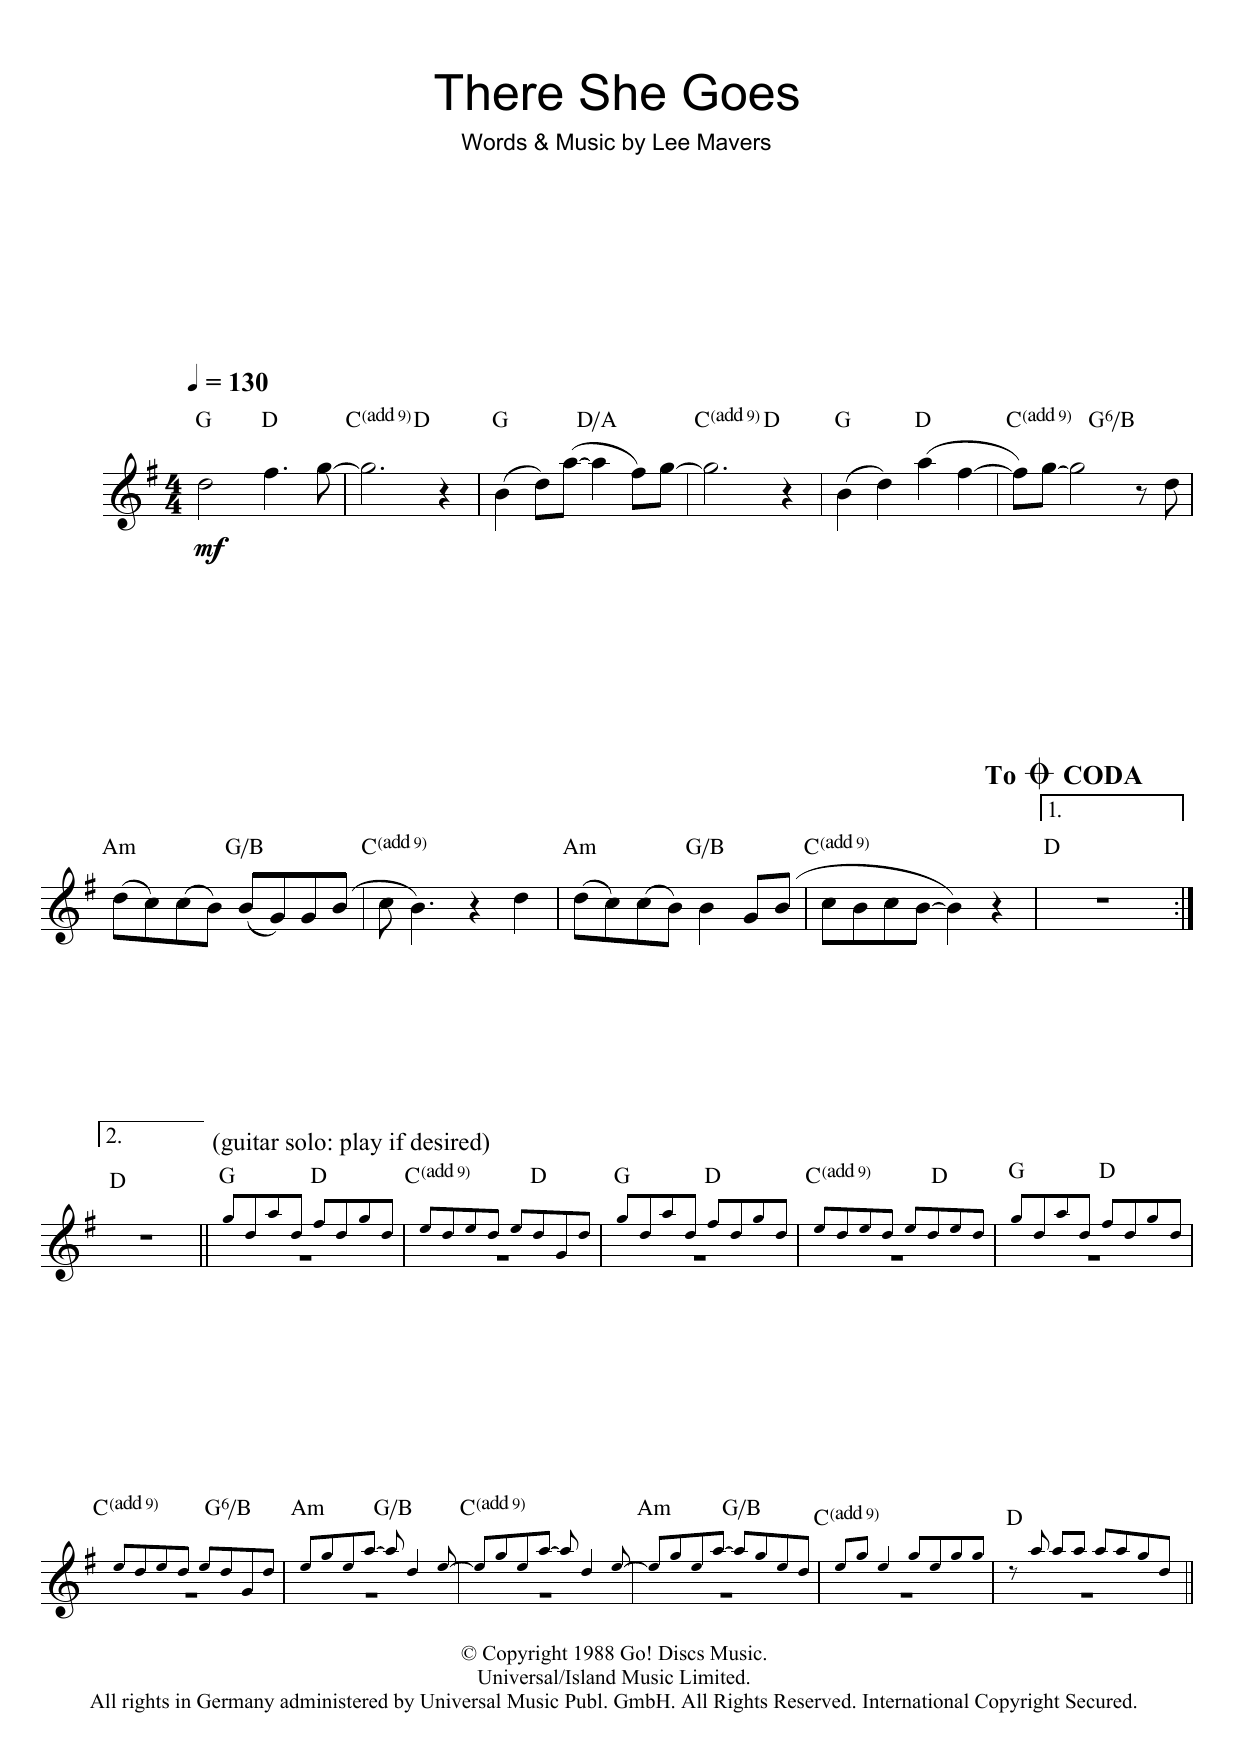 Download The La's There She Goes Sheet Music